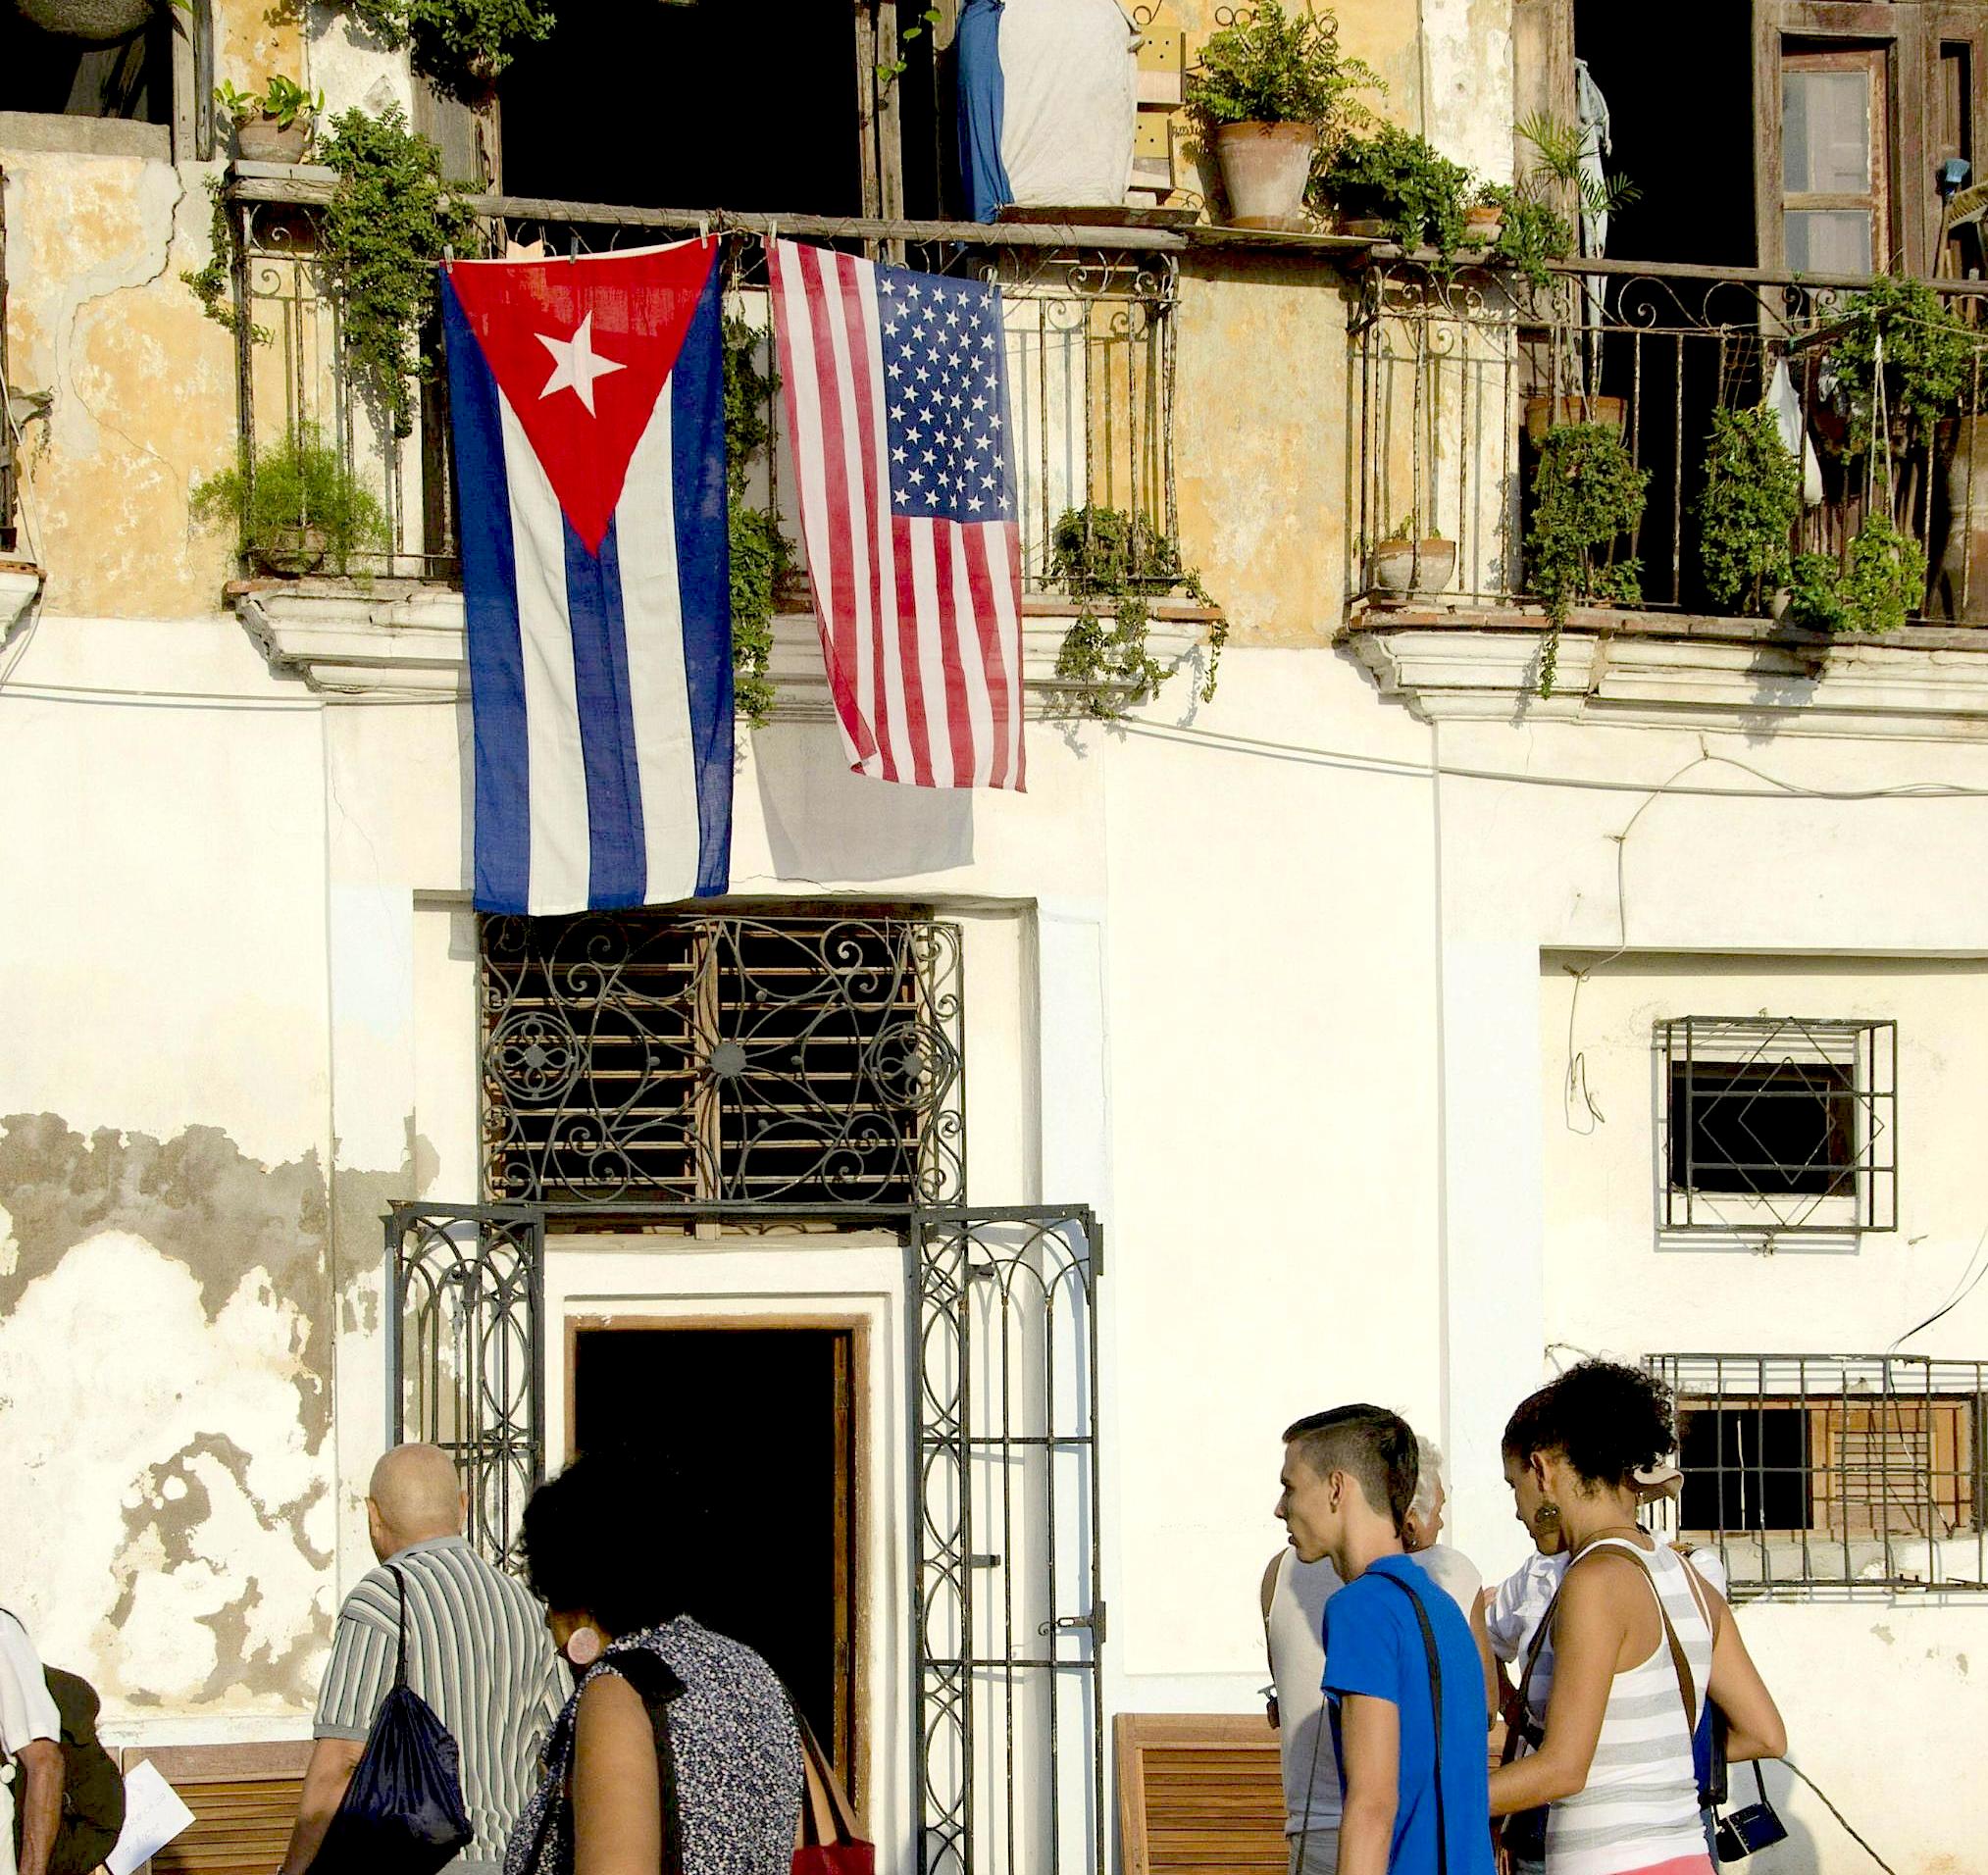 People walk by a balcony with the flags of USA and Cuba in Havana